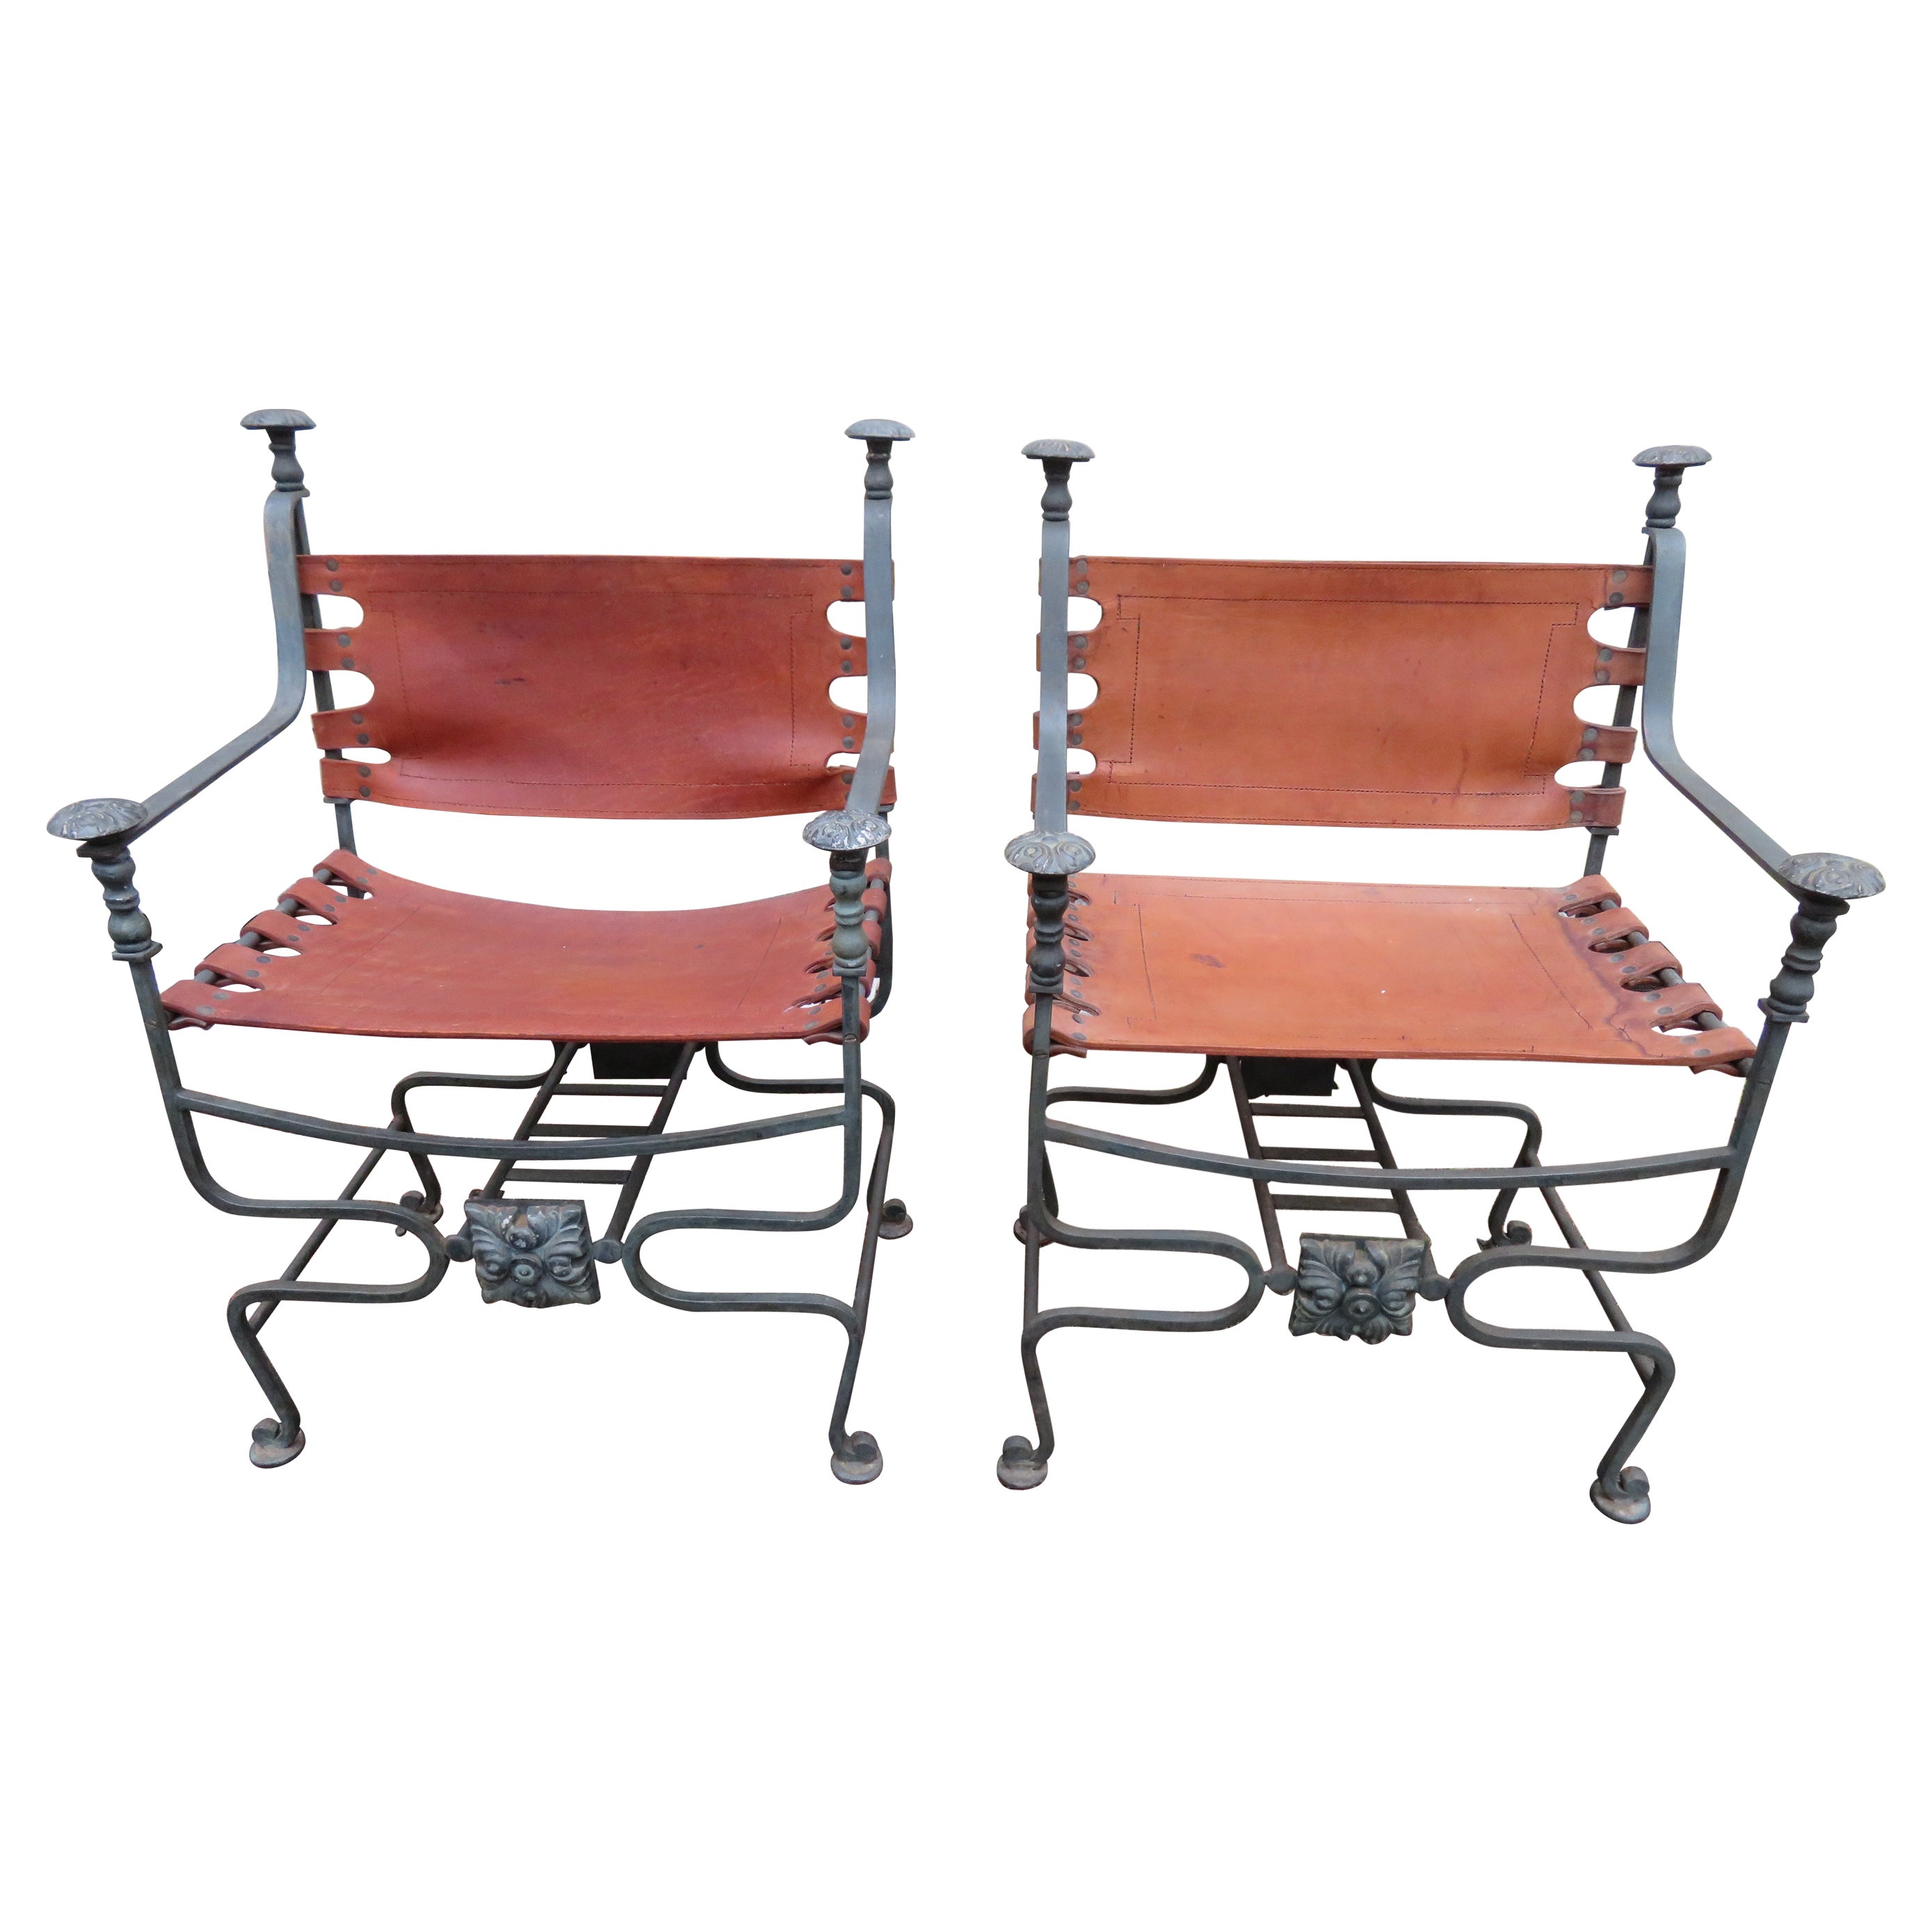 Curule Iron Chairs - 16 For Sale on 1stDibs | curule chair for sale, iron  chairs for sale